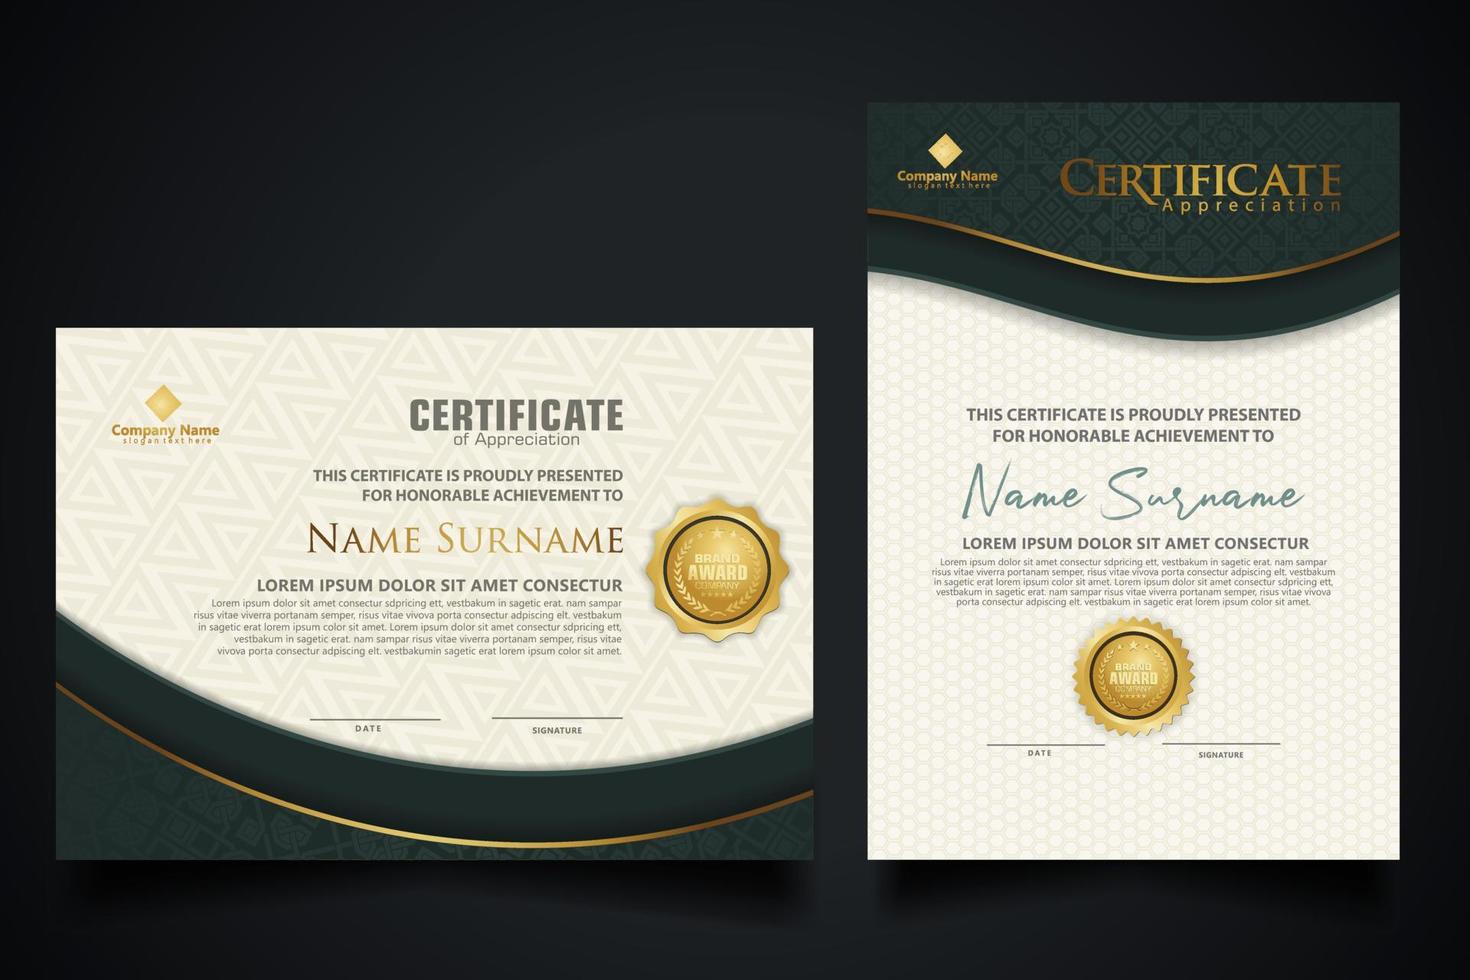 Luxury certificate template with elegant corner frame and realistic texture pattern, diploma Vector illustration